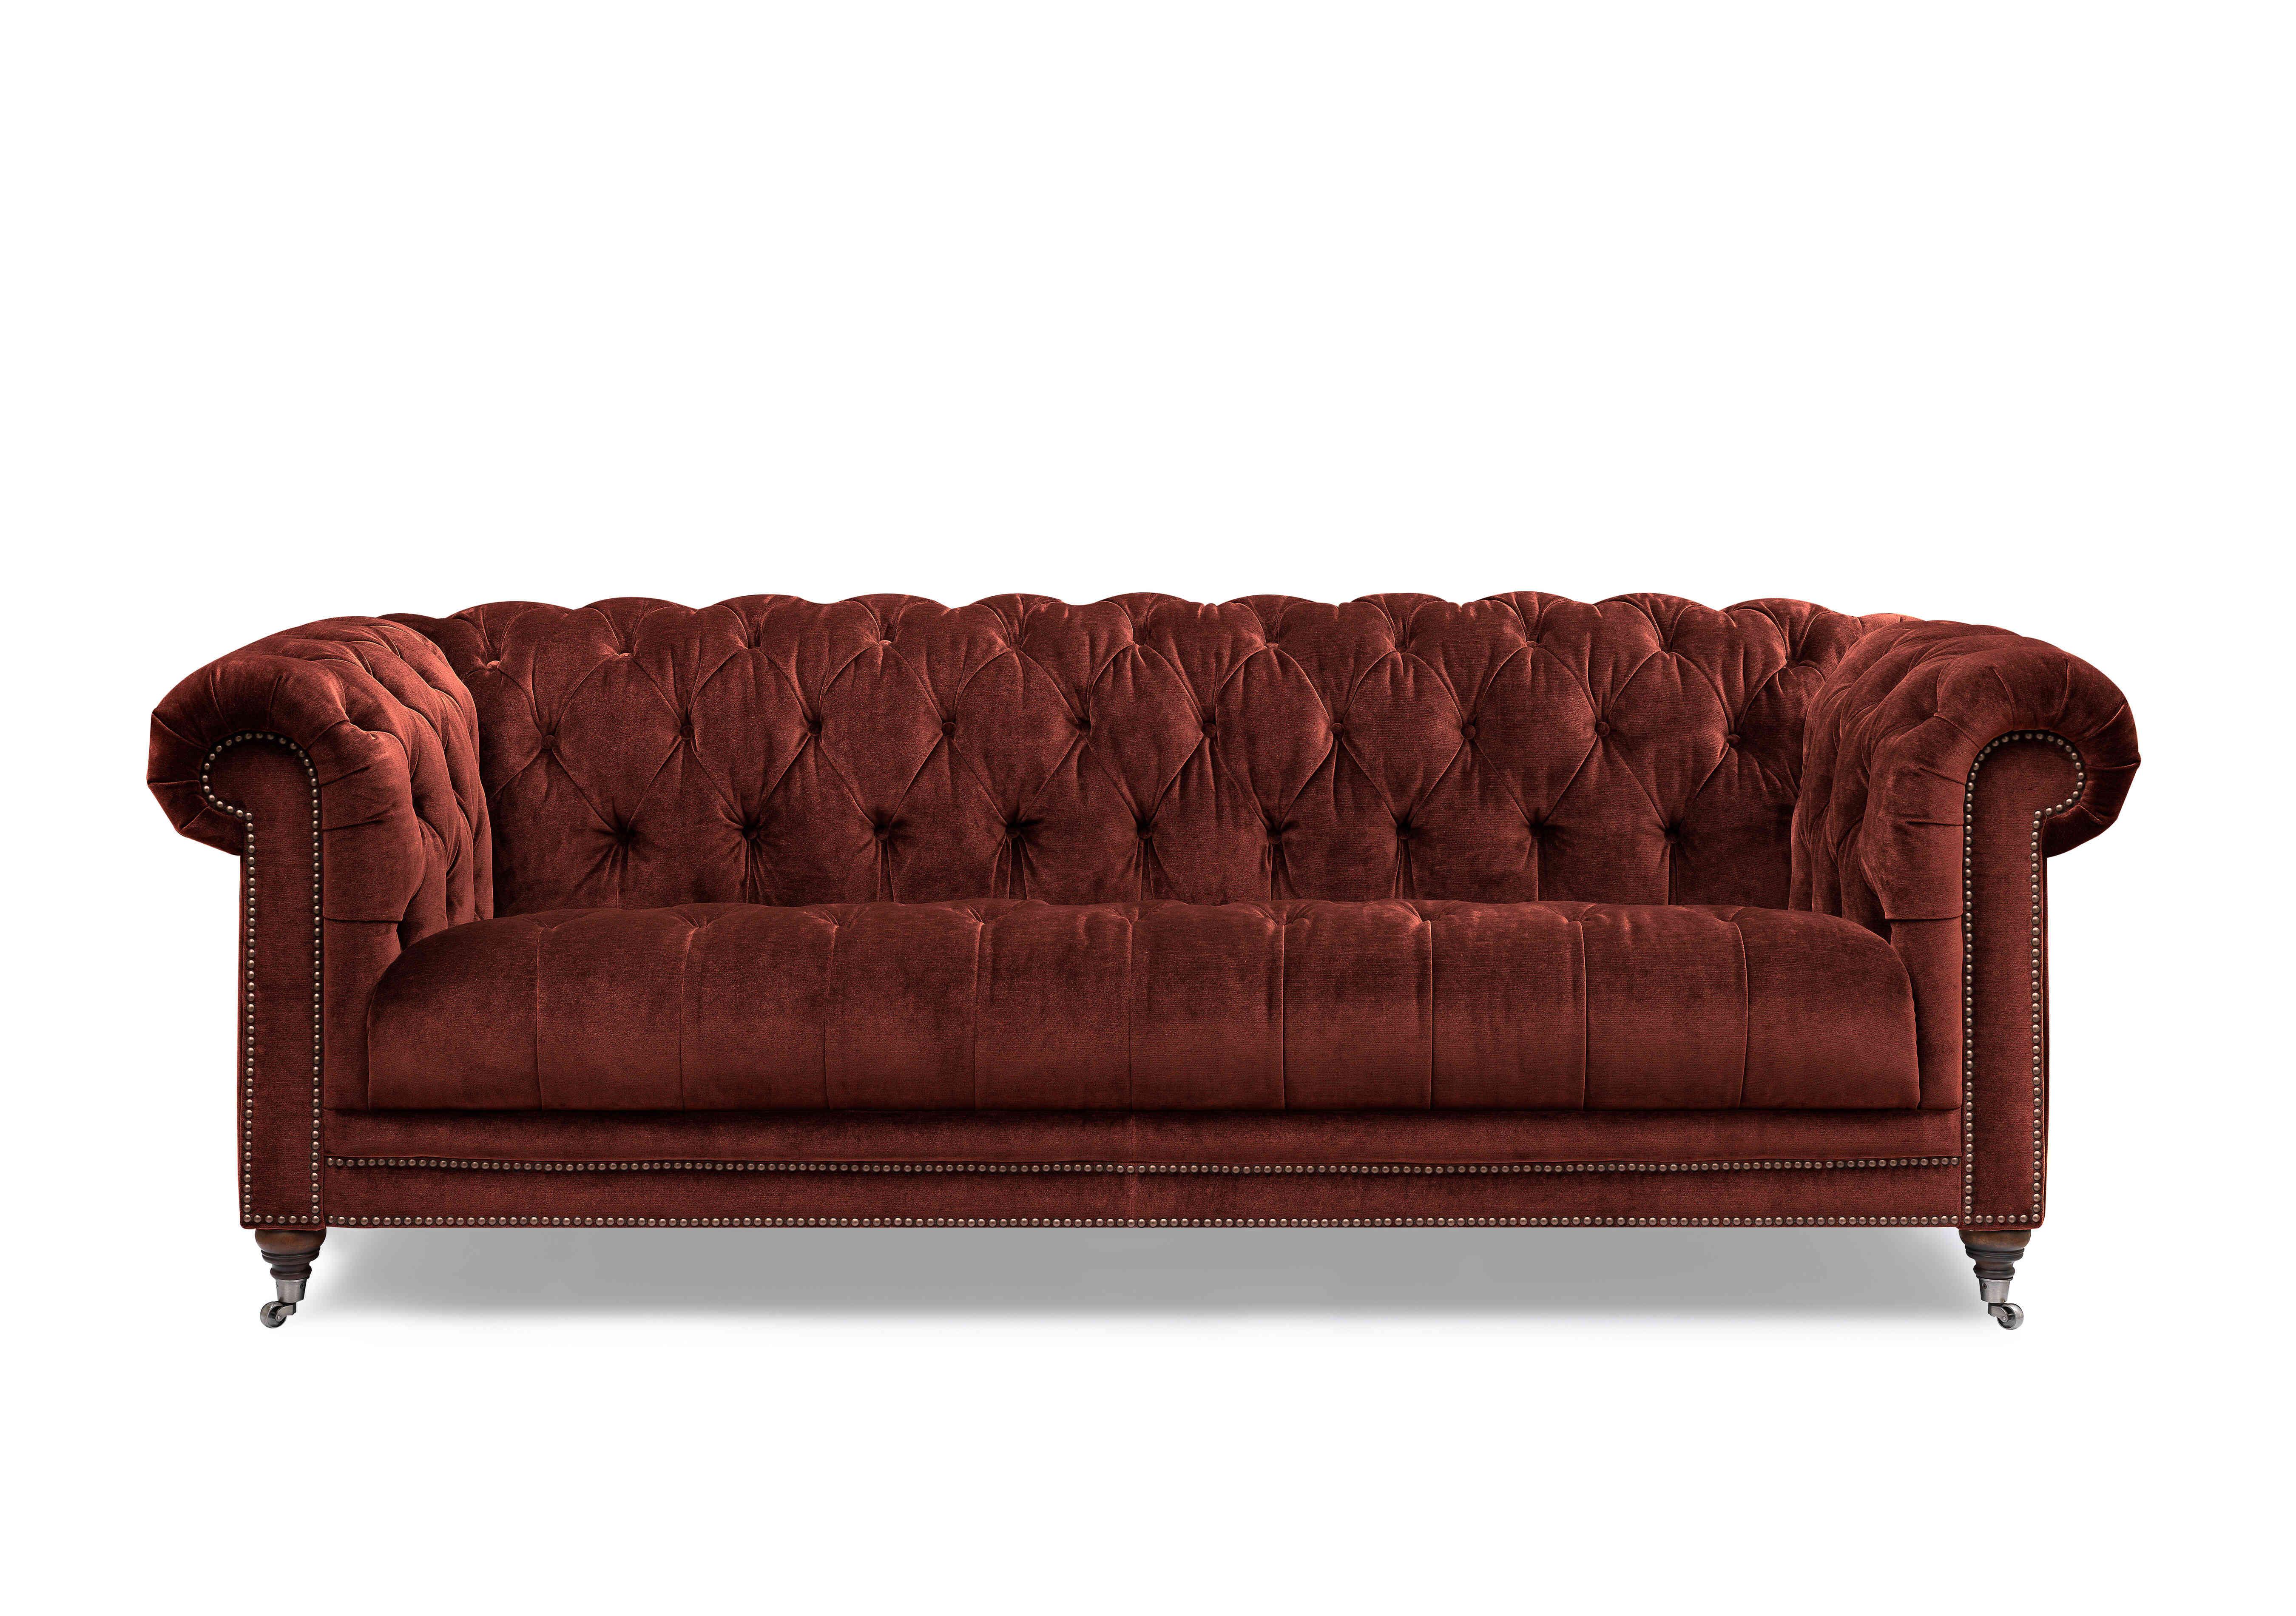 Walter 4 Seater Fabric Chesterfield Sofa with USB-C in X3y1-W019 Tawny on Furniture Village